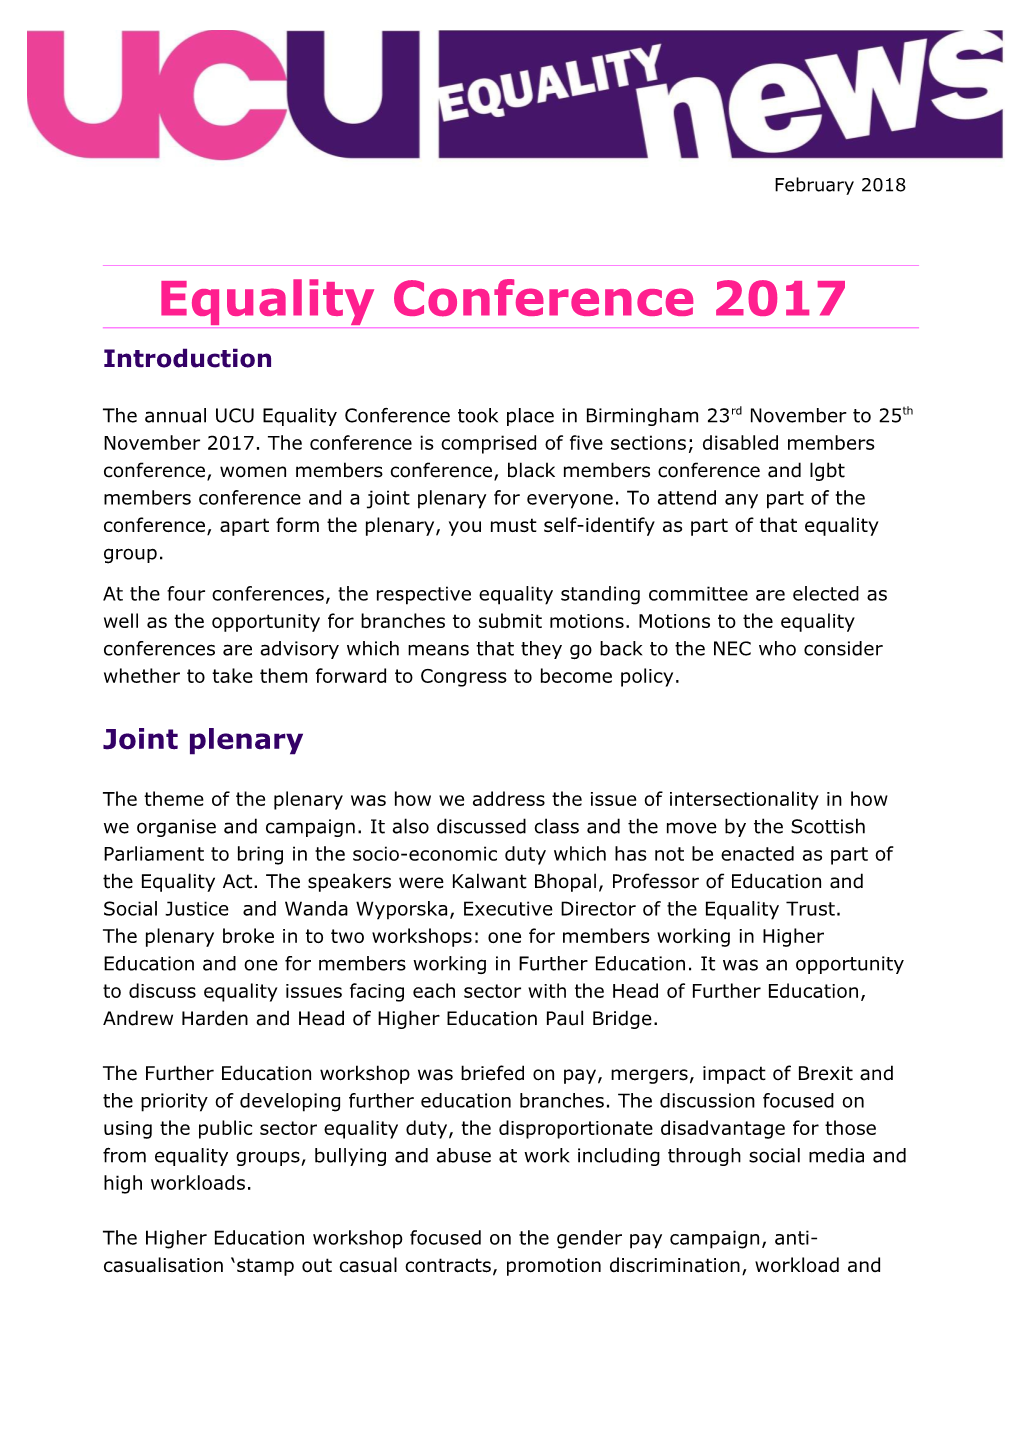 Equality Conference 2017